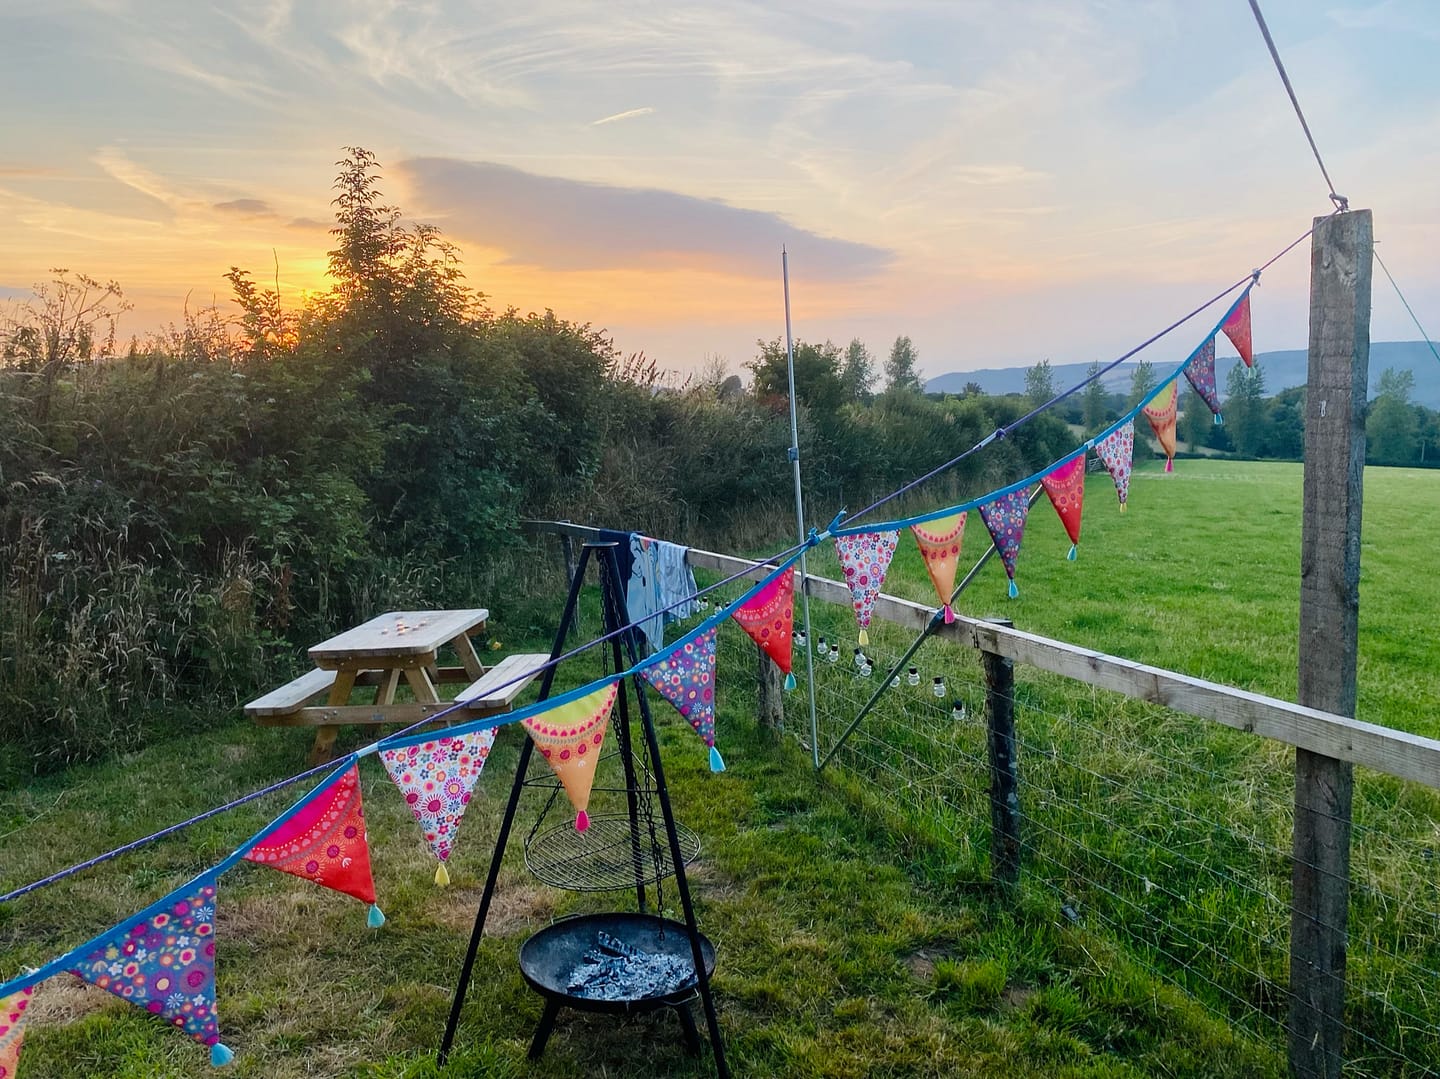 All we need is a Bell Tent...